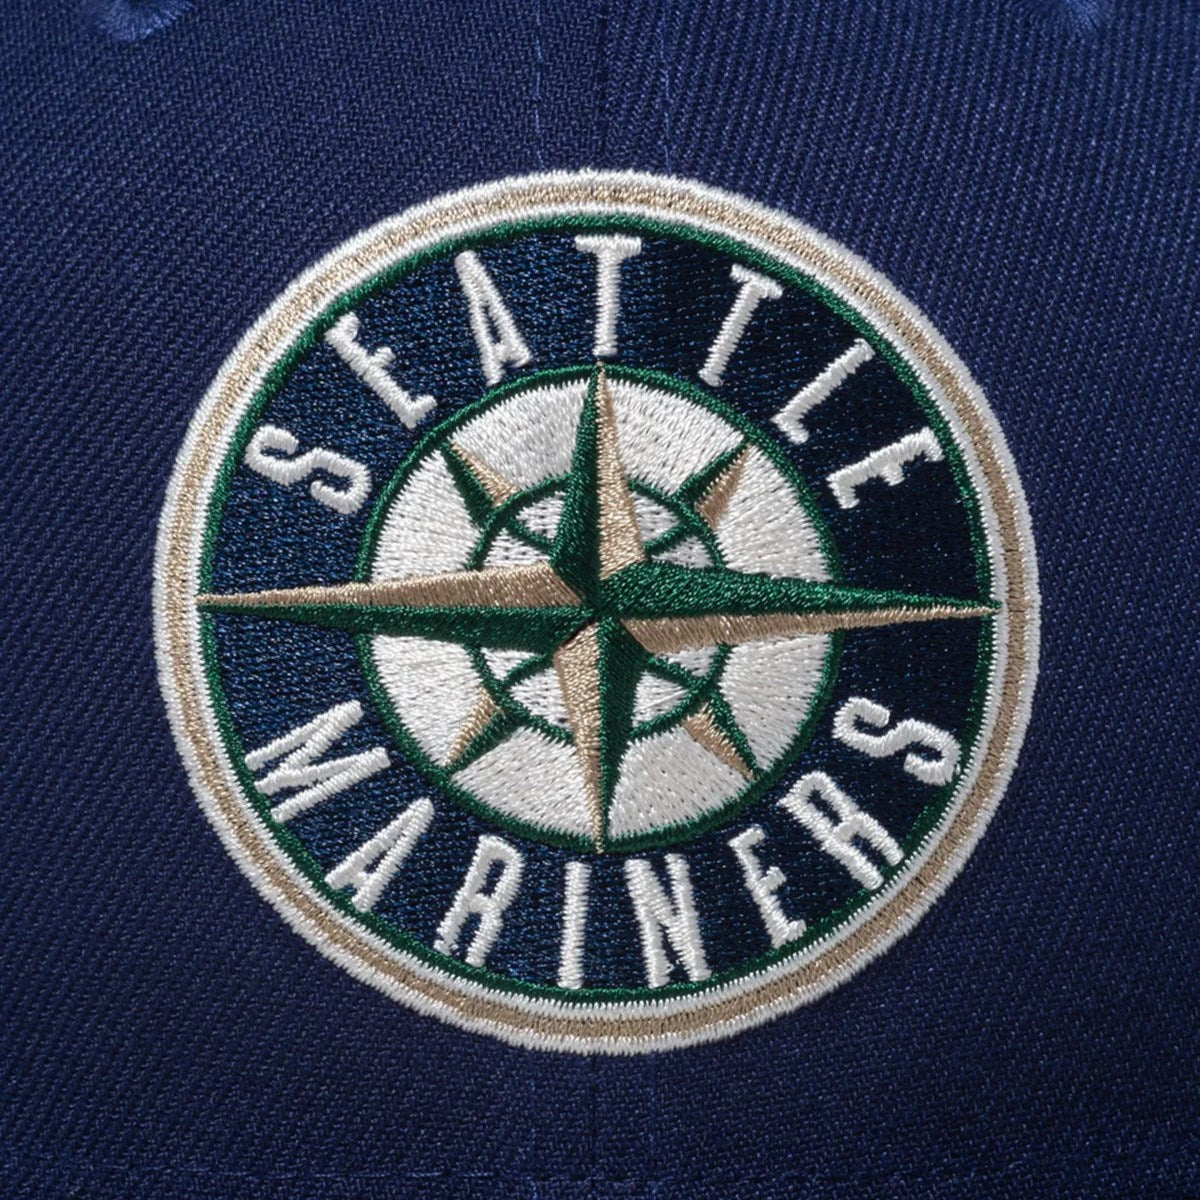 NEW ERA Seatles Mariners - 59FIFTY Vintage Color LNVY NVY【14174577】